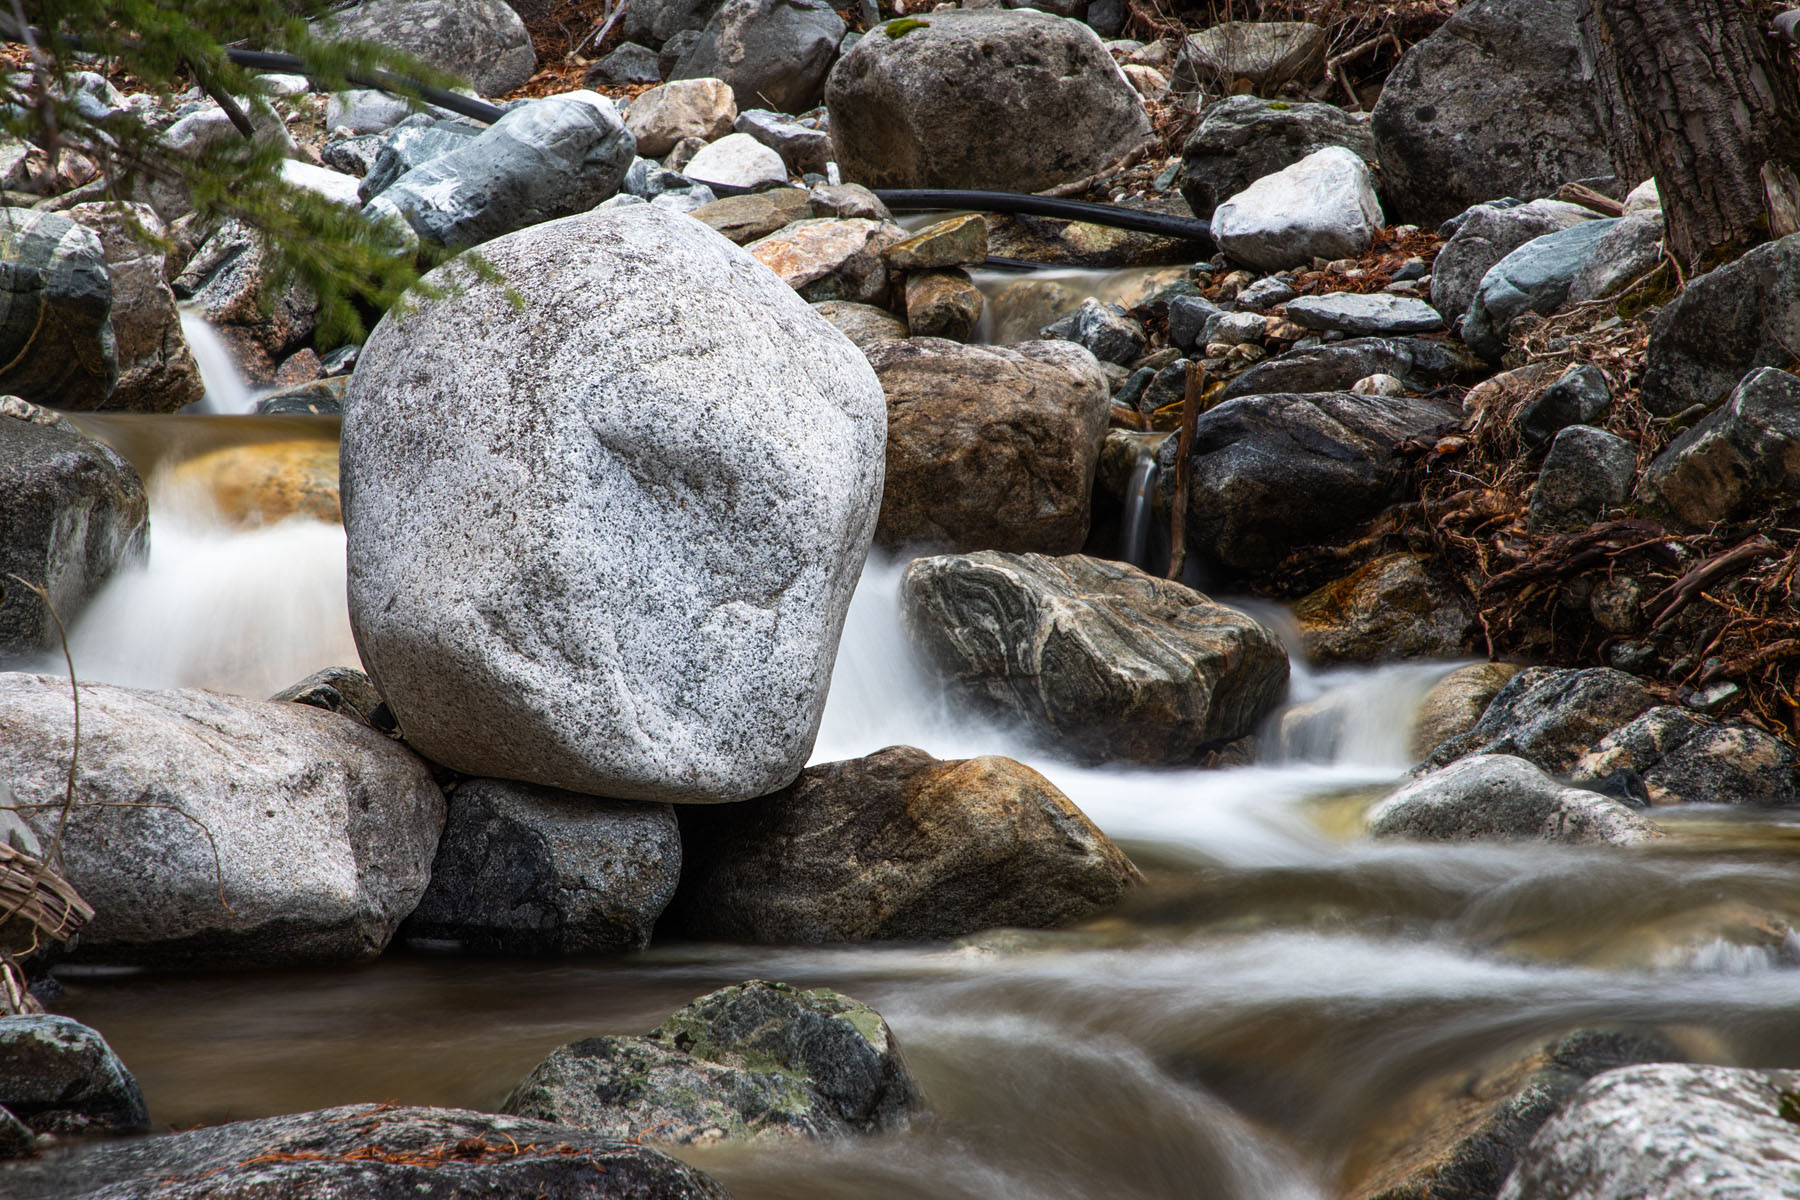 Snow Creek in the national forest,.  Polarizer filter, exposure 1.6 seconds.  Click for next photo.